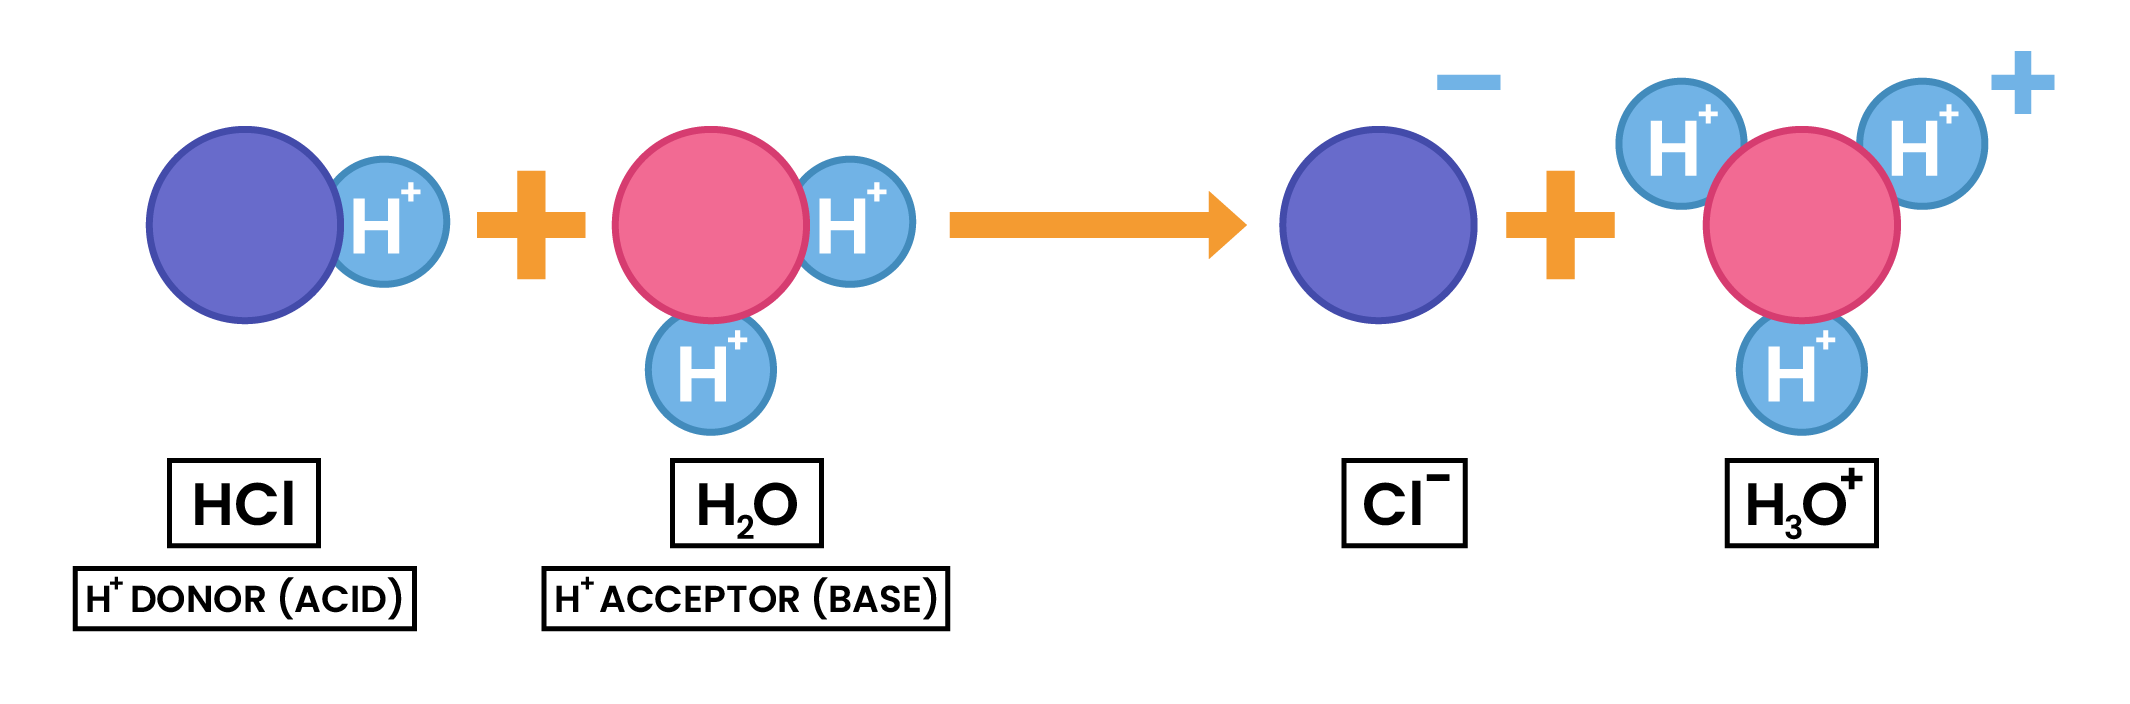 edexcel_igcse_chemistry_topic 16_acids, bases, and salt preparations_002_hydrogen donors and hydrogen acceptors diagram ionic half equation